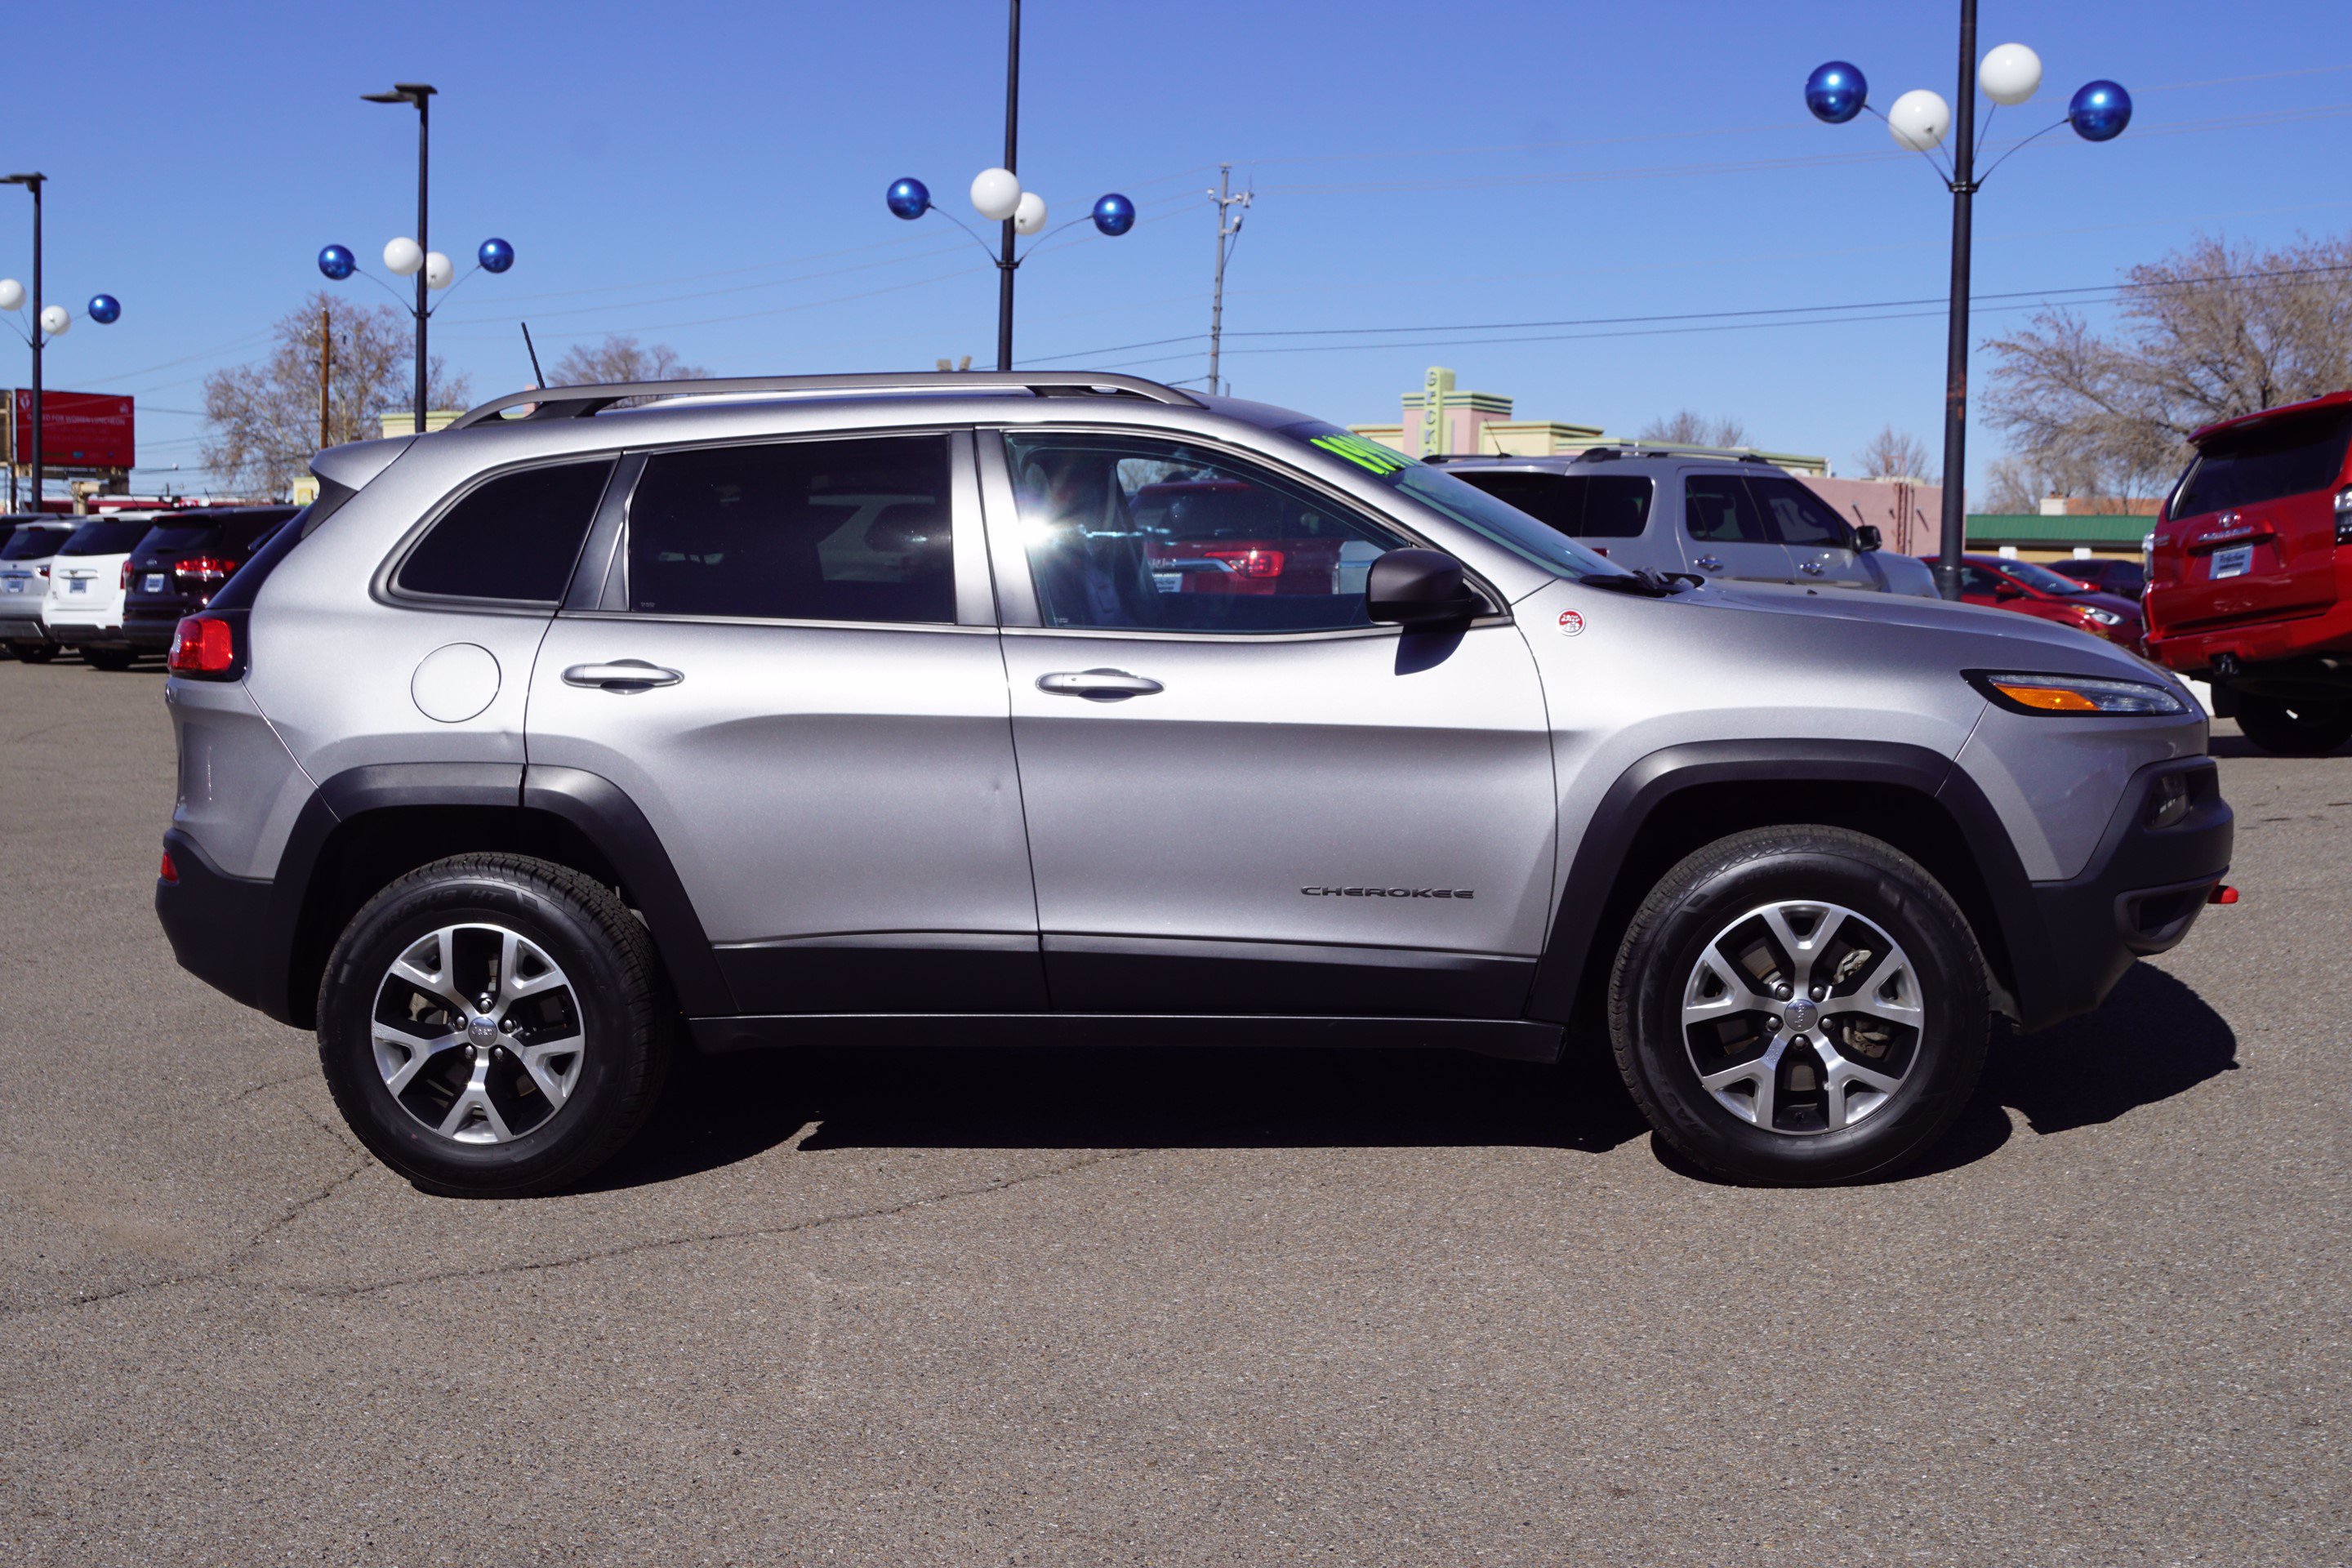 PreOwned 2016 Jeep Cherokee Trailhawk Sport Utility in